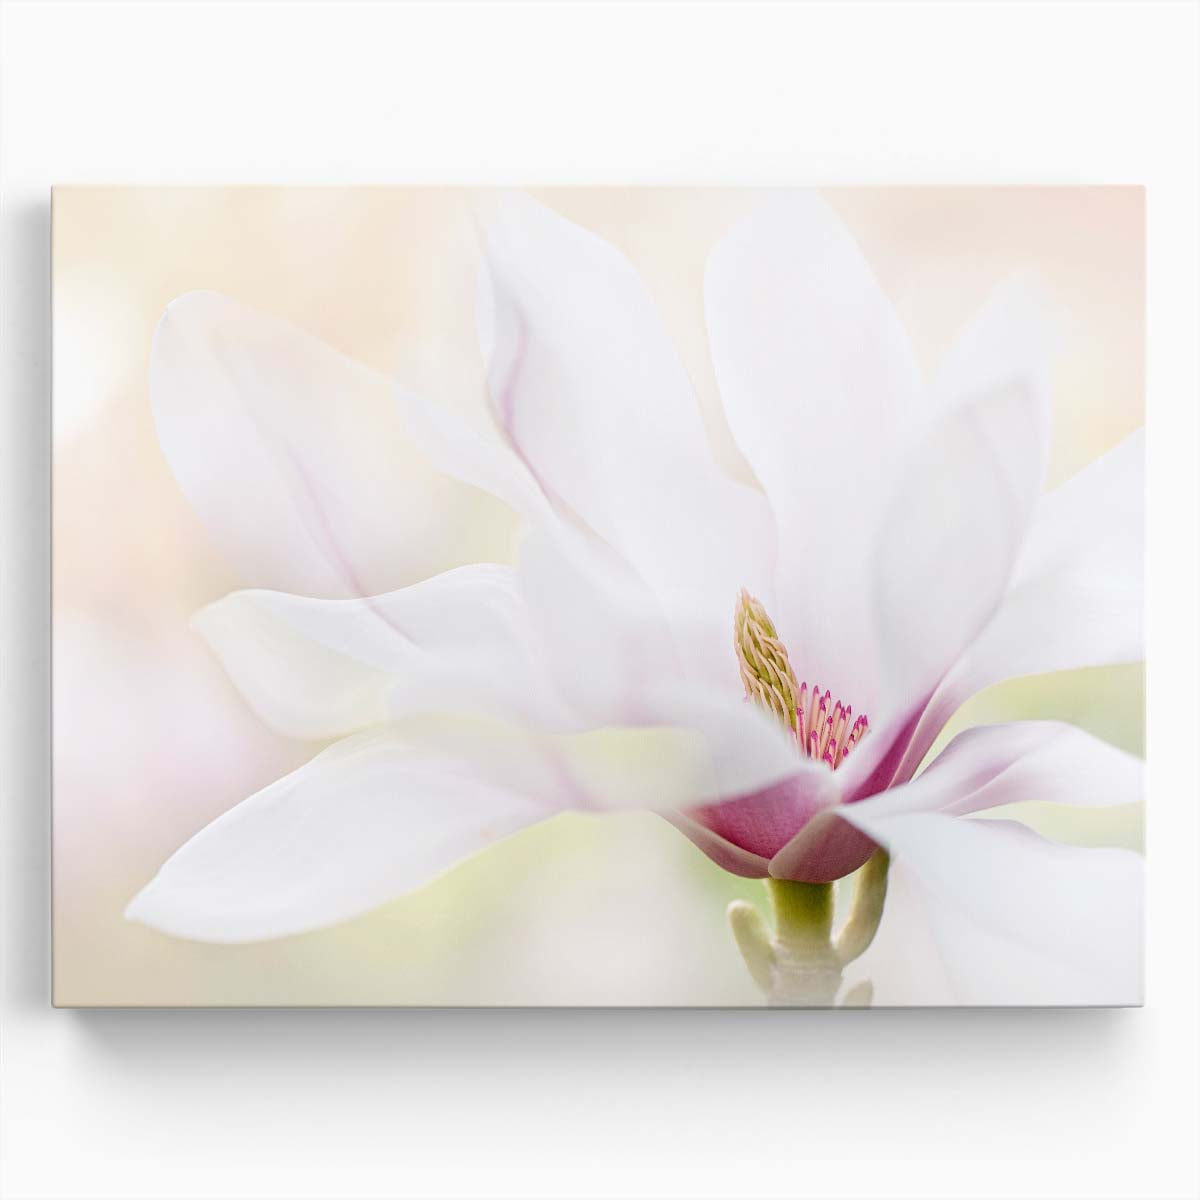 White Magnolia Bloom Macro Floral Garden Wall Art by Luxuriance Designs. Made in USA.